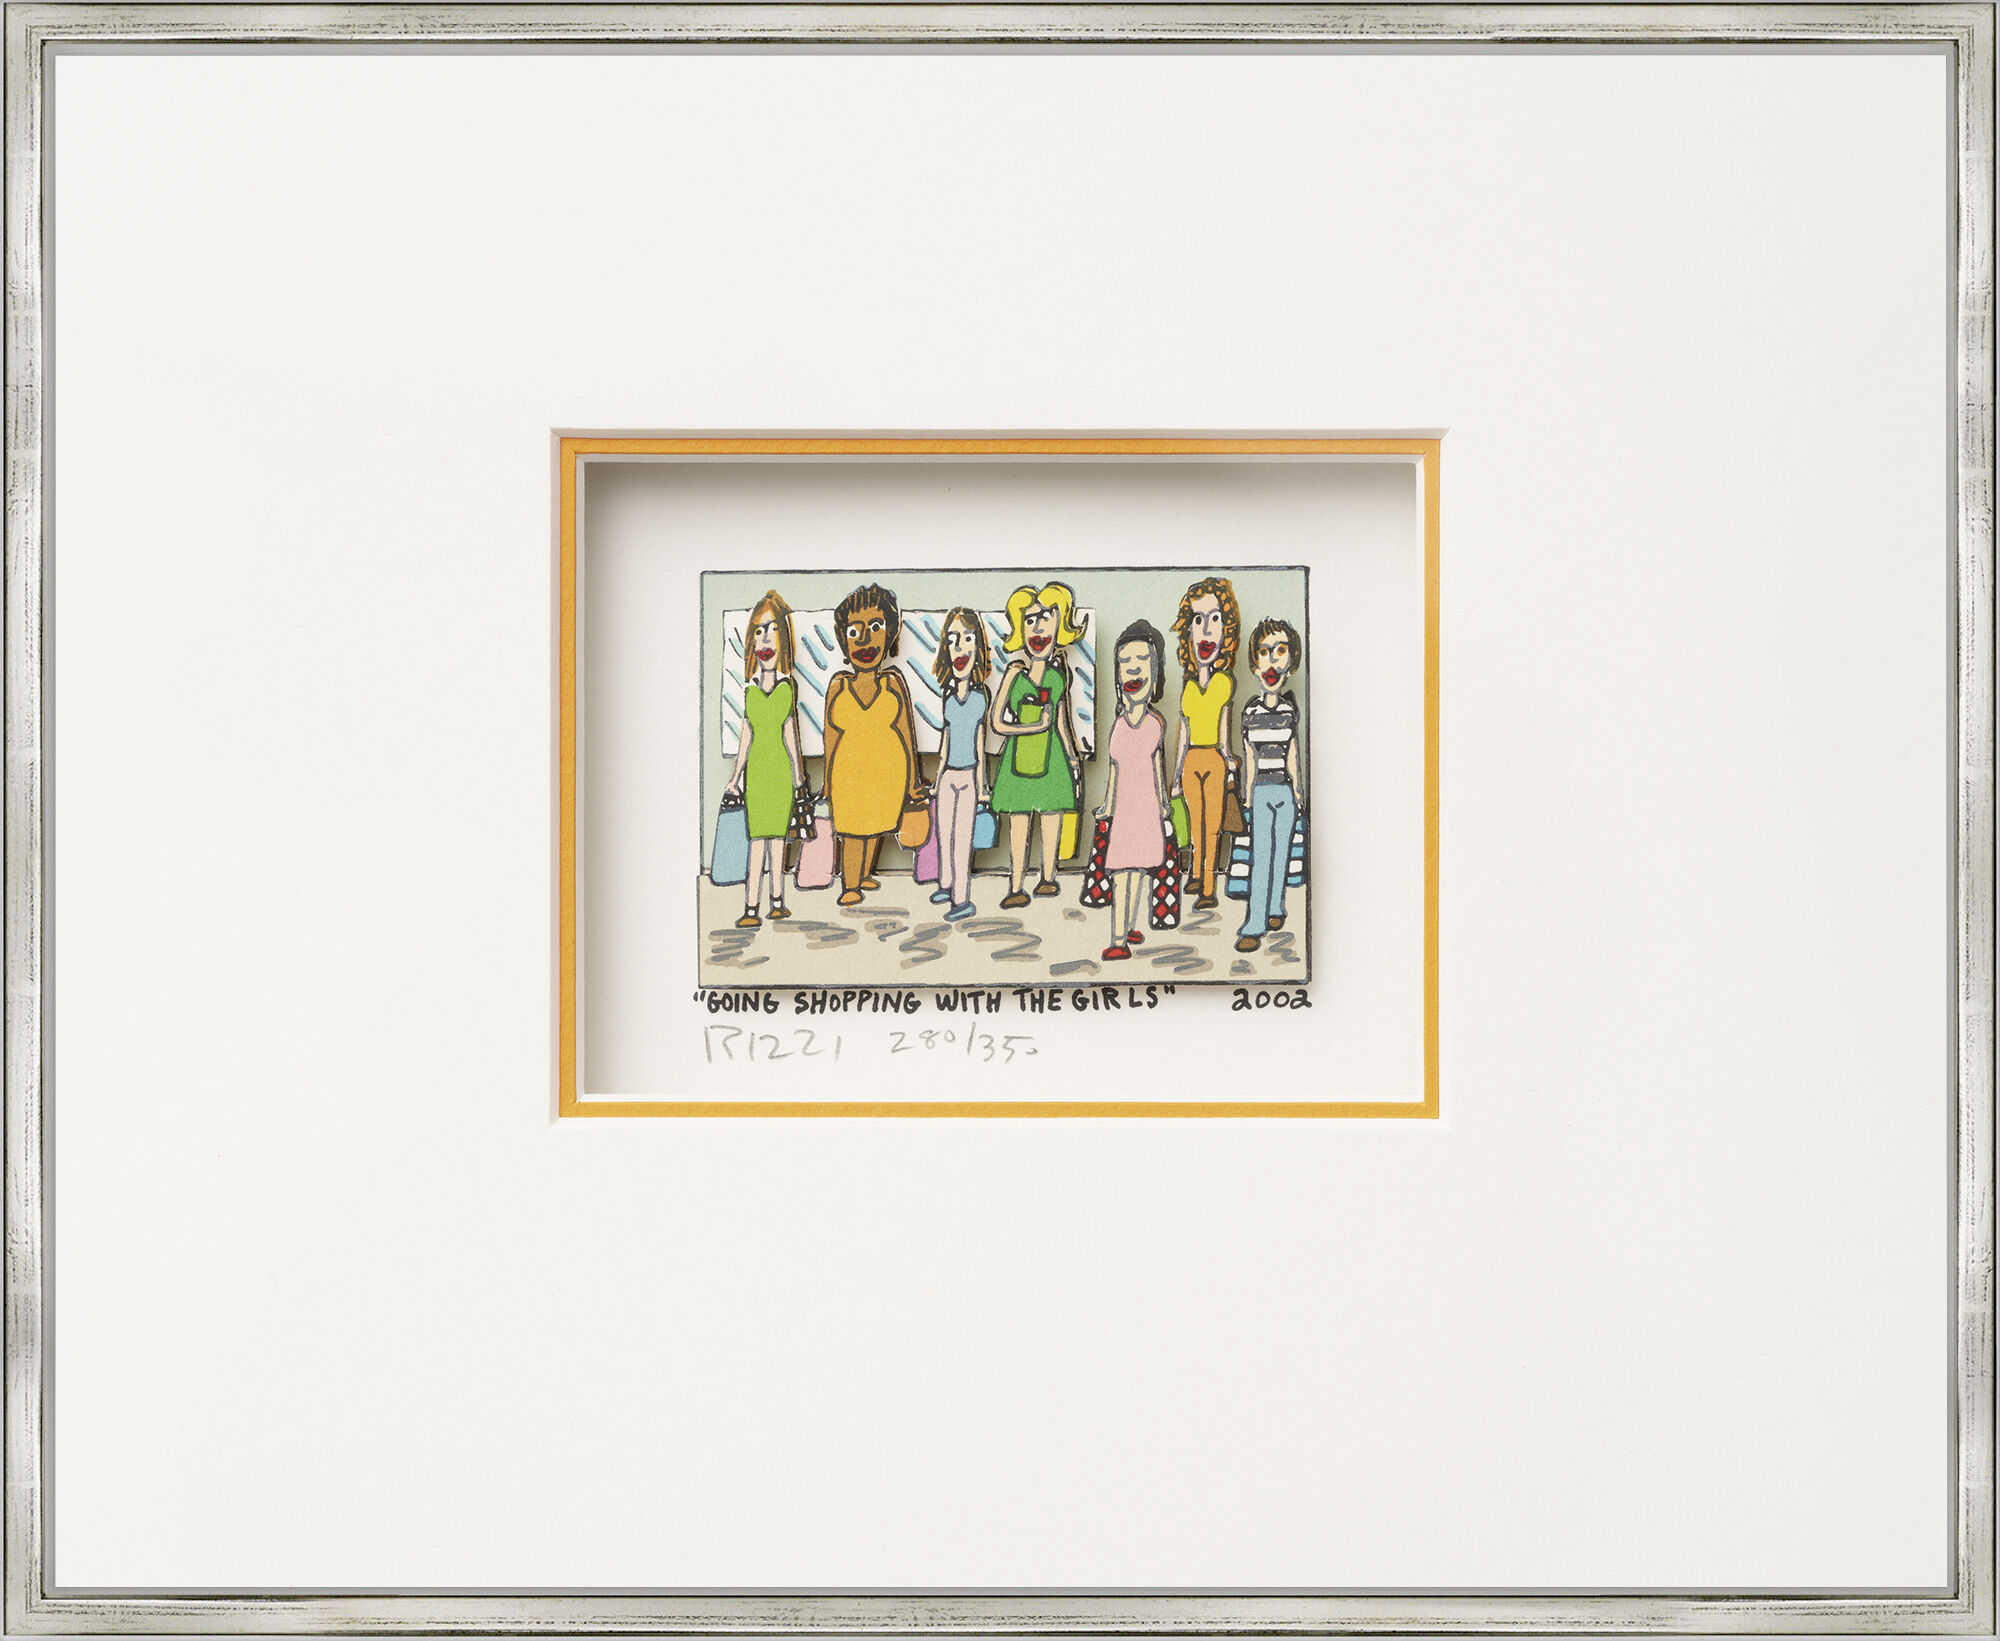 Picture "Going Shopping with the girls" (2002) by James Rizzi